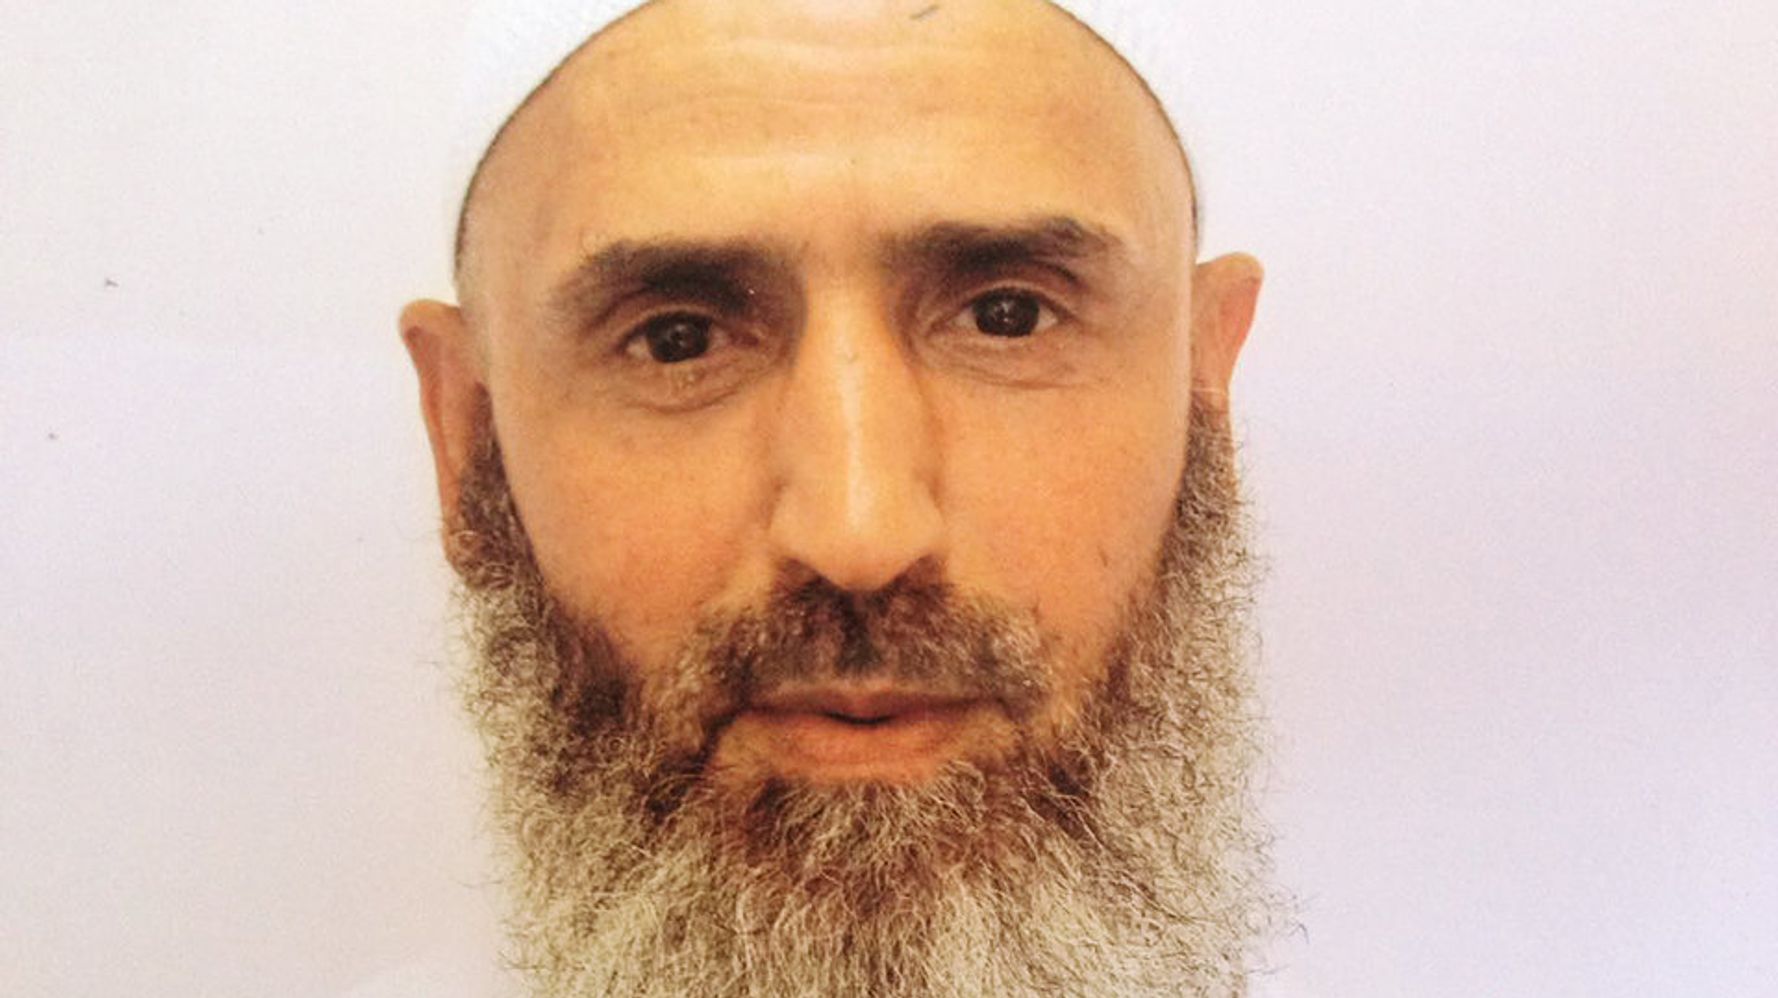 Abdul Latif Nasser Released From Guantanamo After 19 Years Of Detention Without Charge